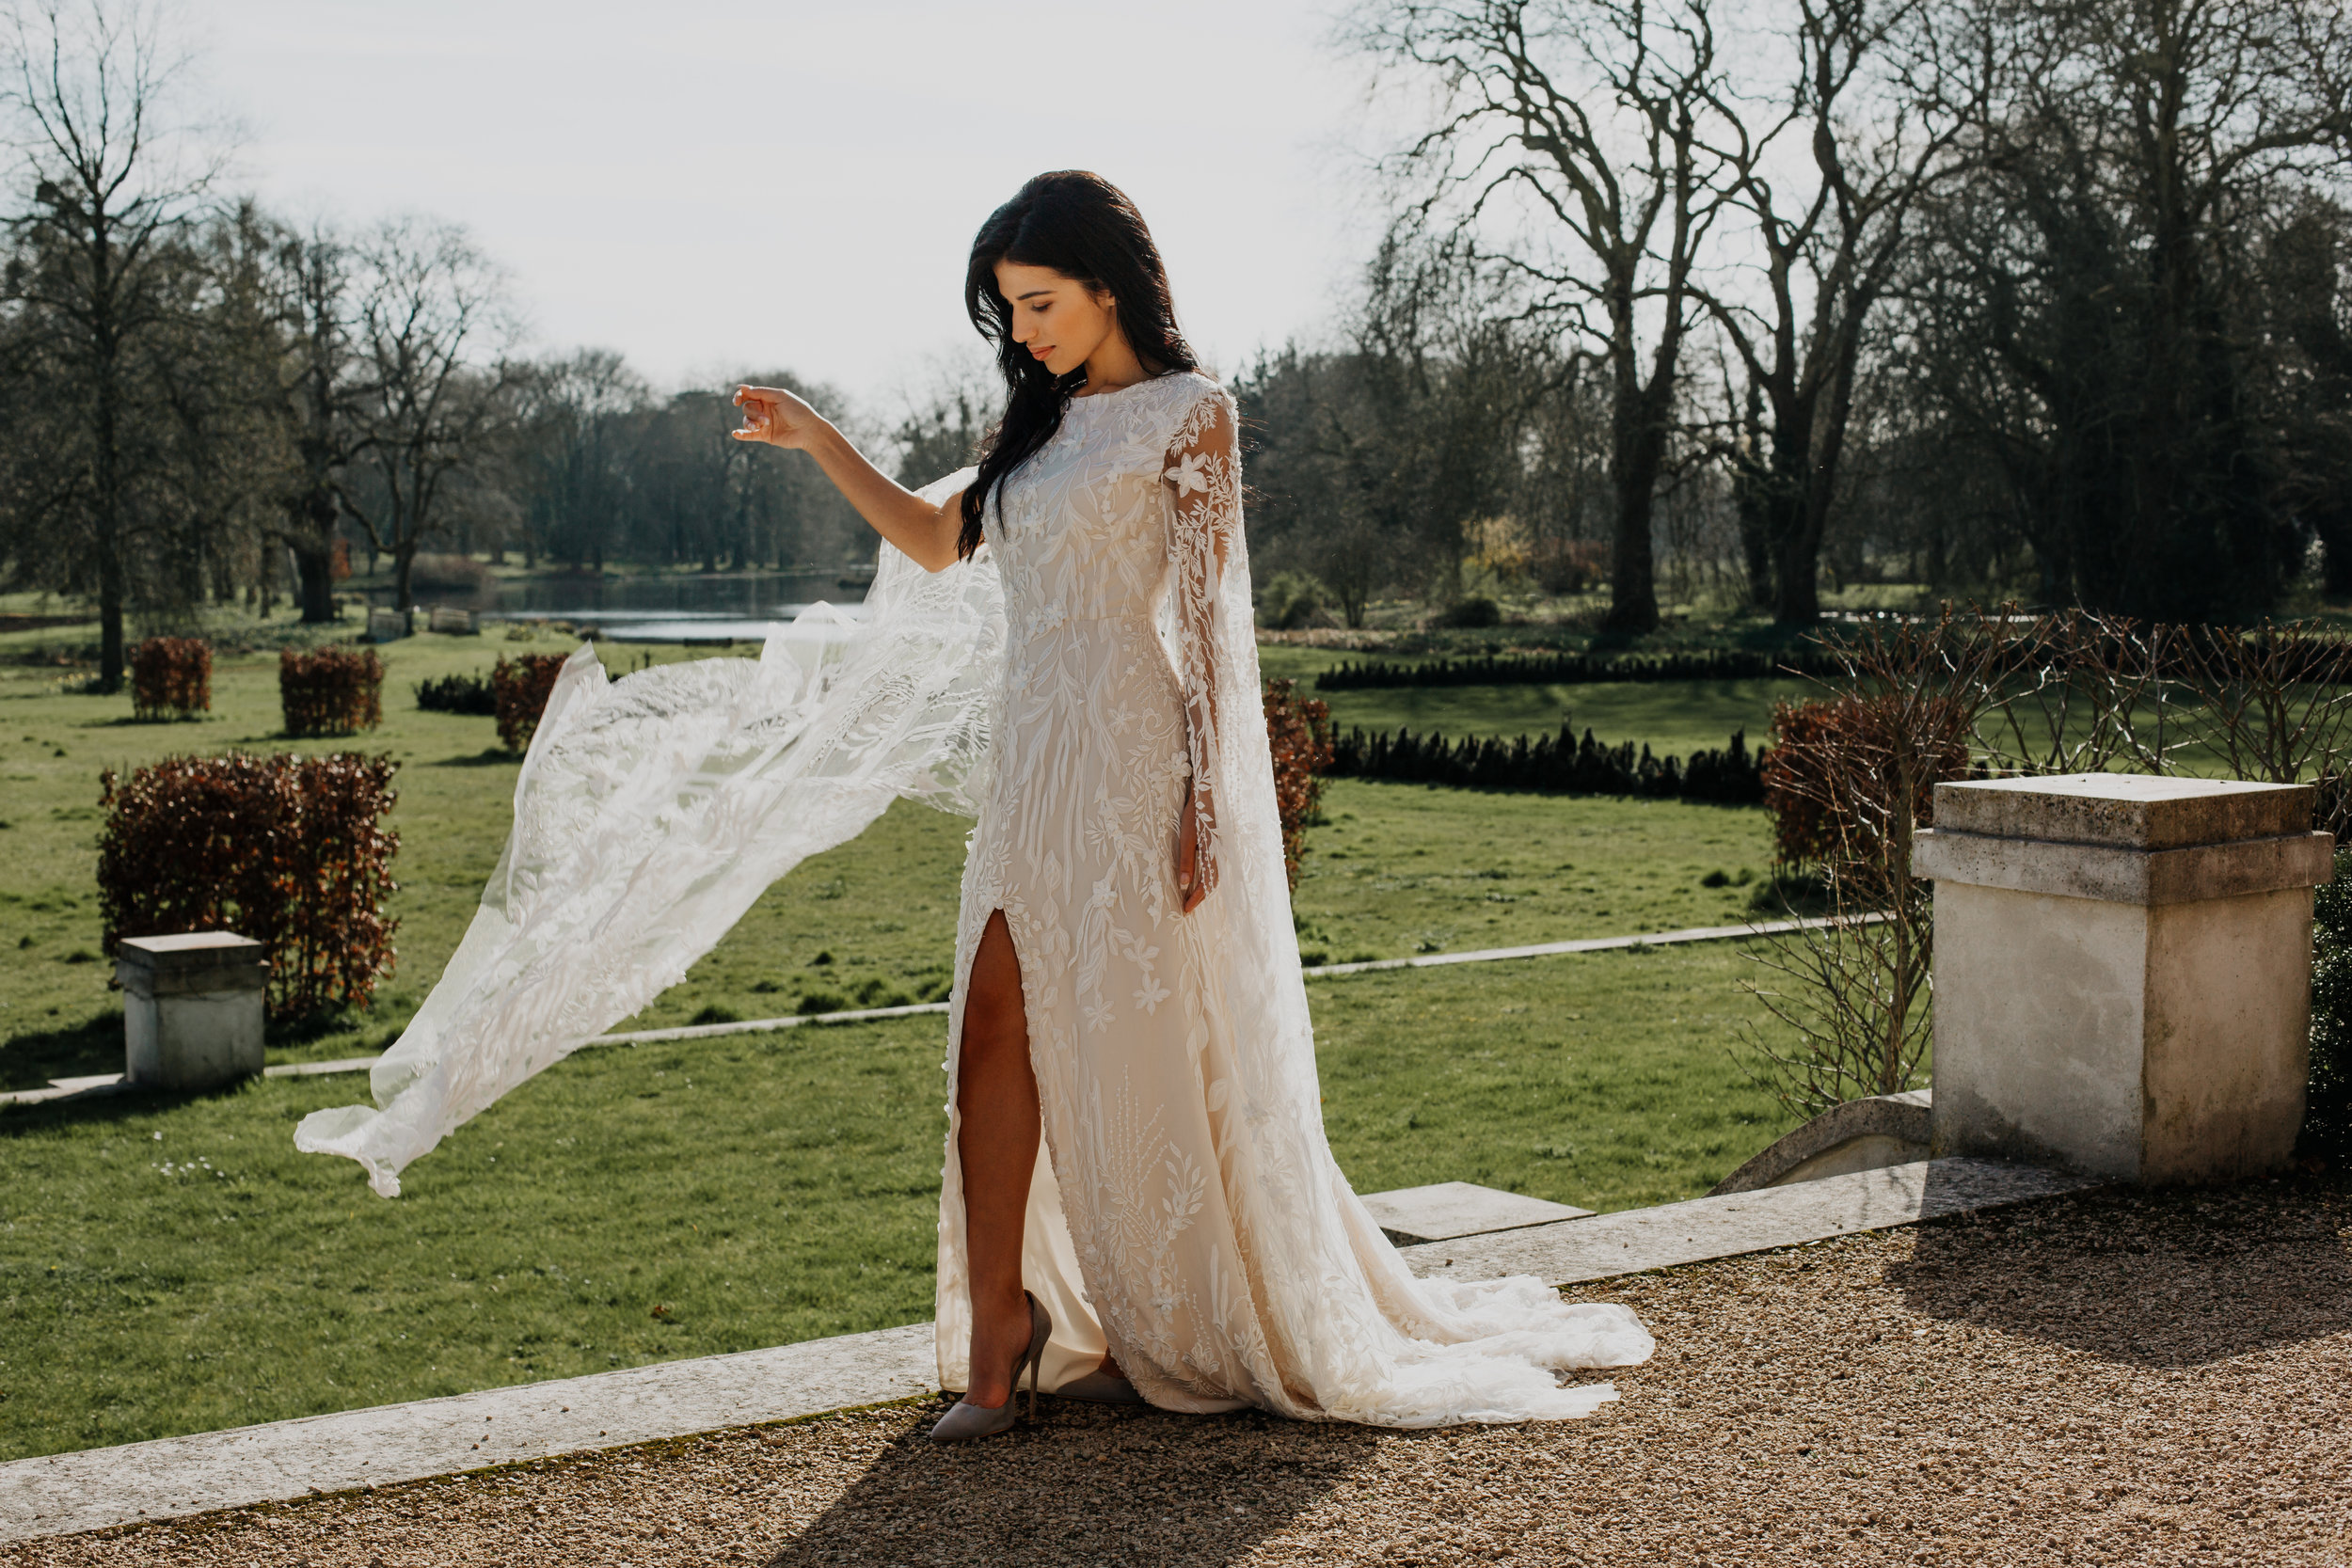 Lilly Sells Photography Wedding Shoot at St Giles House, Dorset